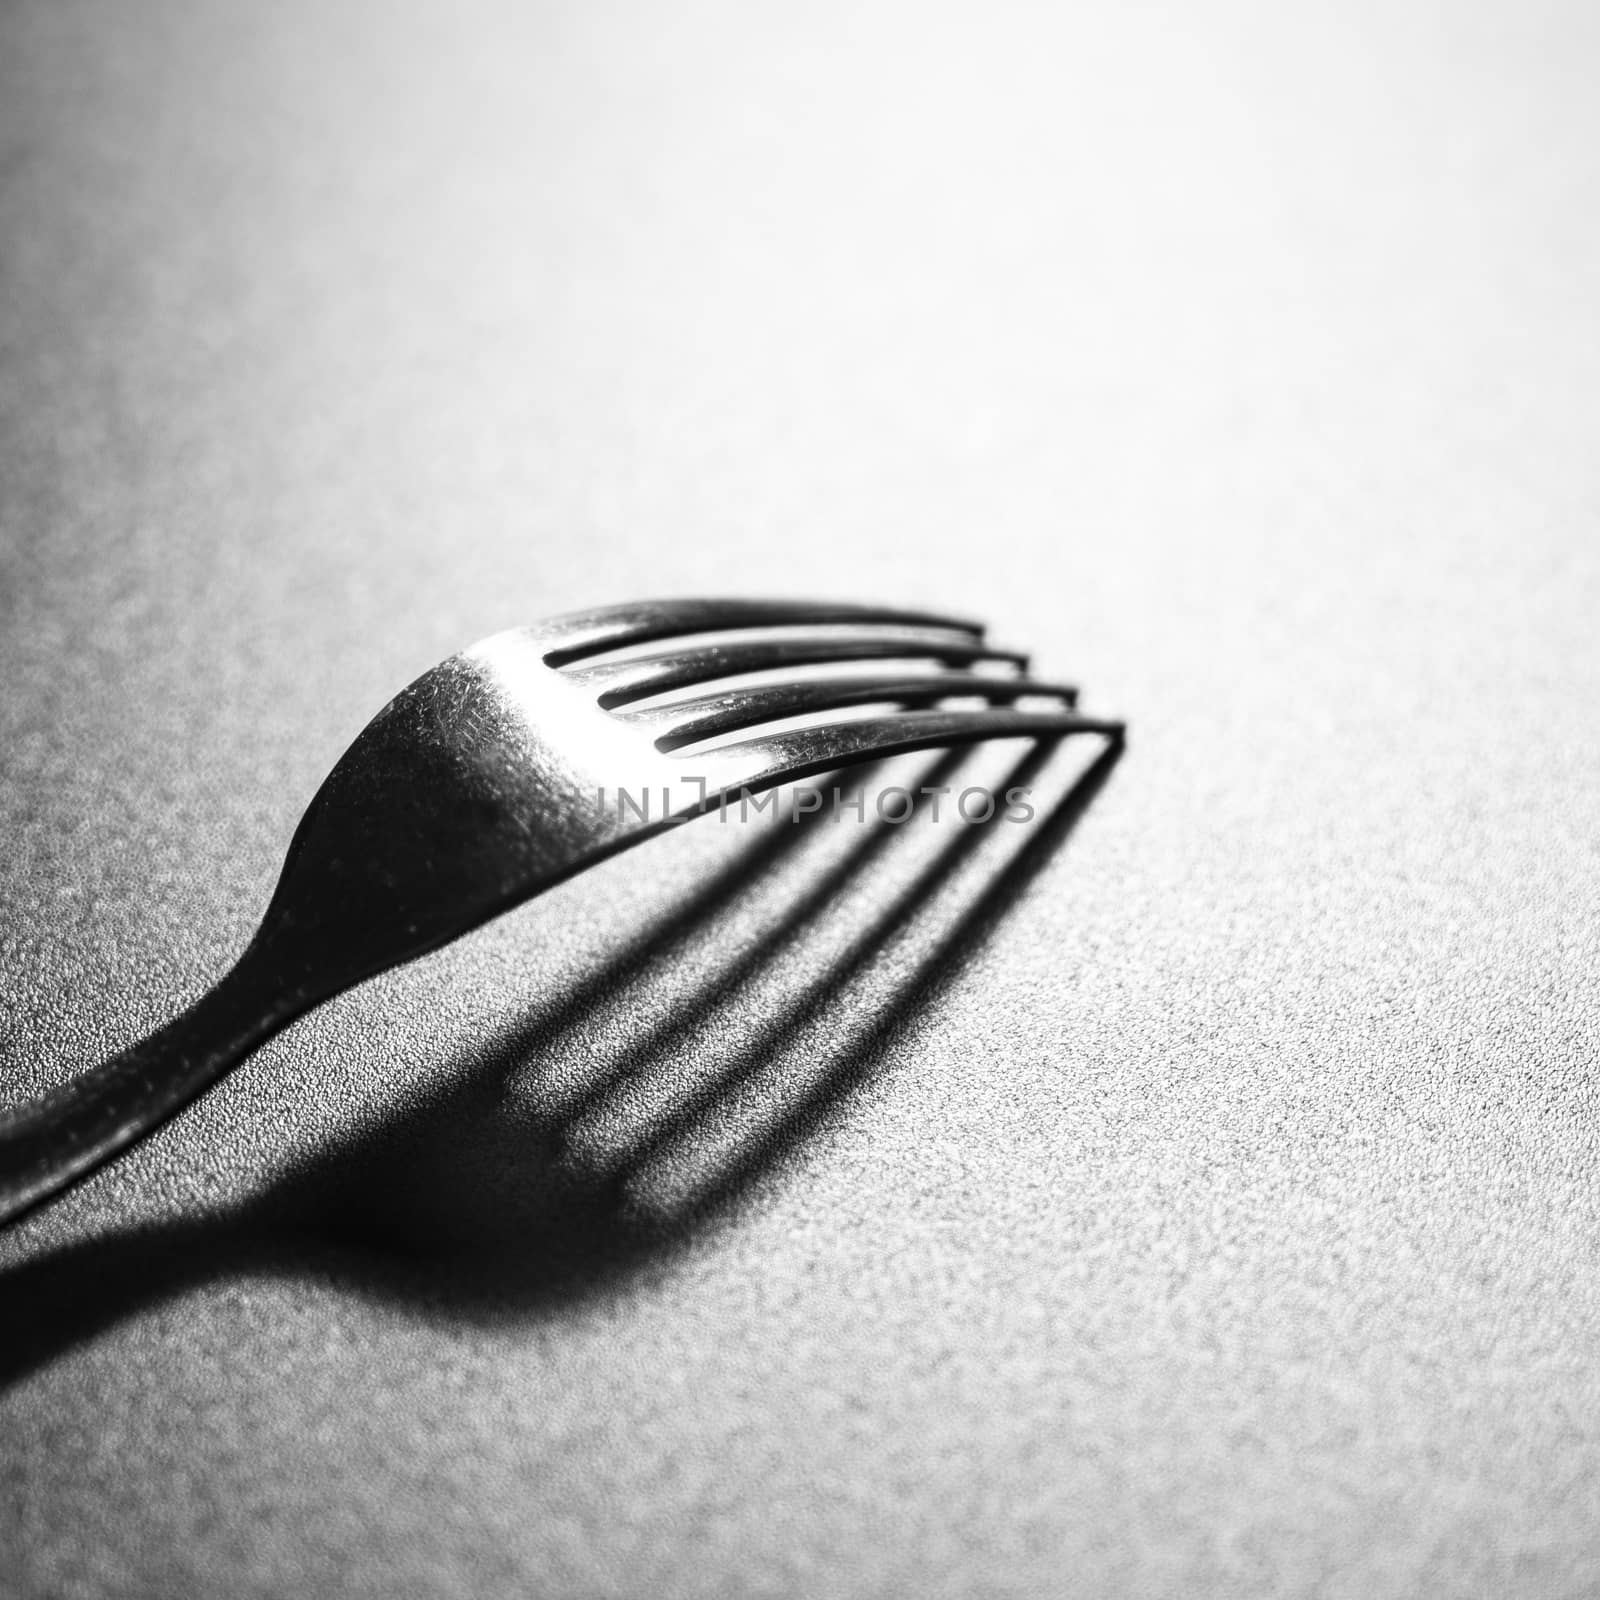 the shadow of a fork on a black surface